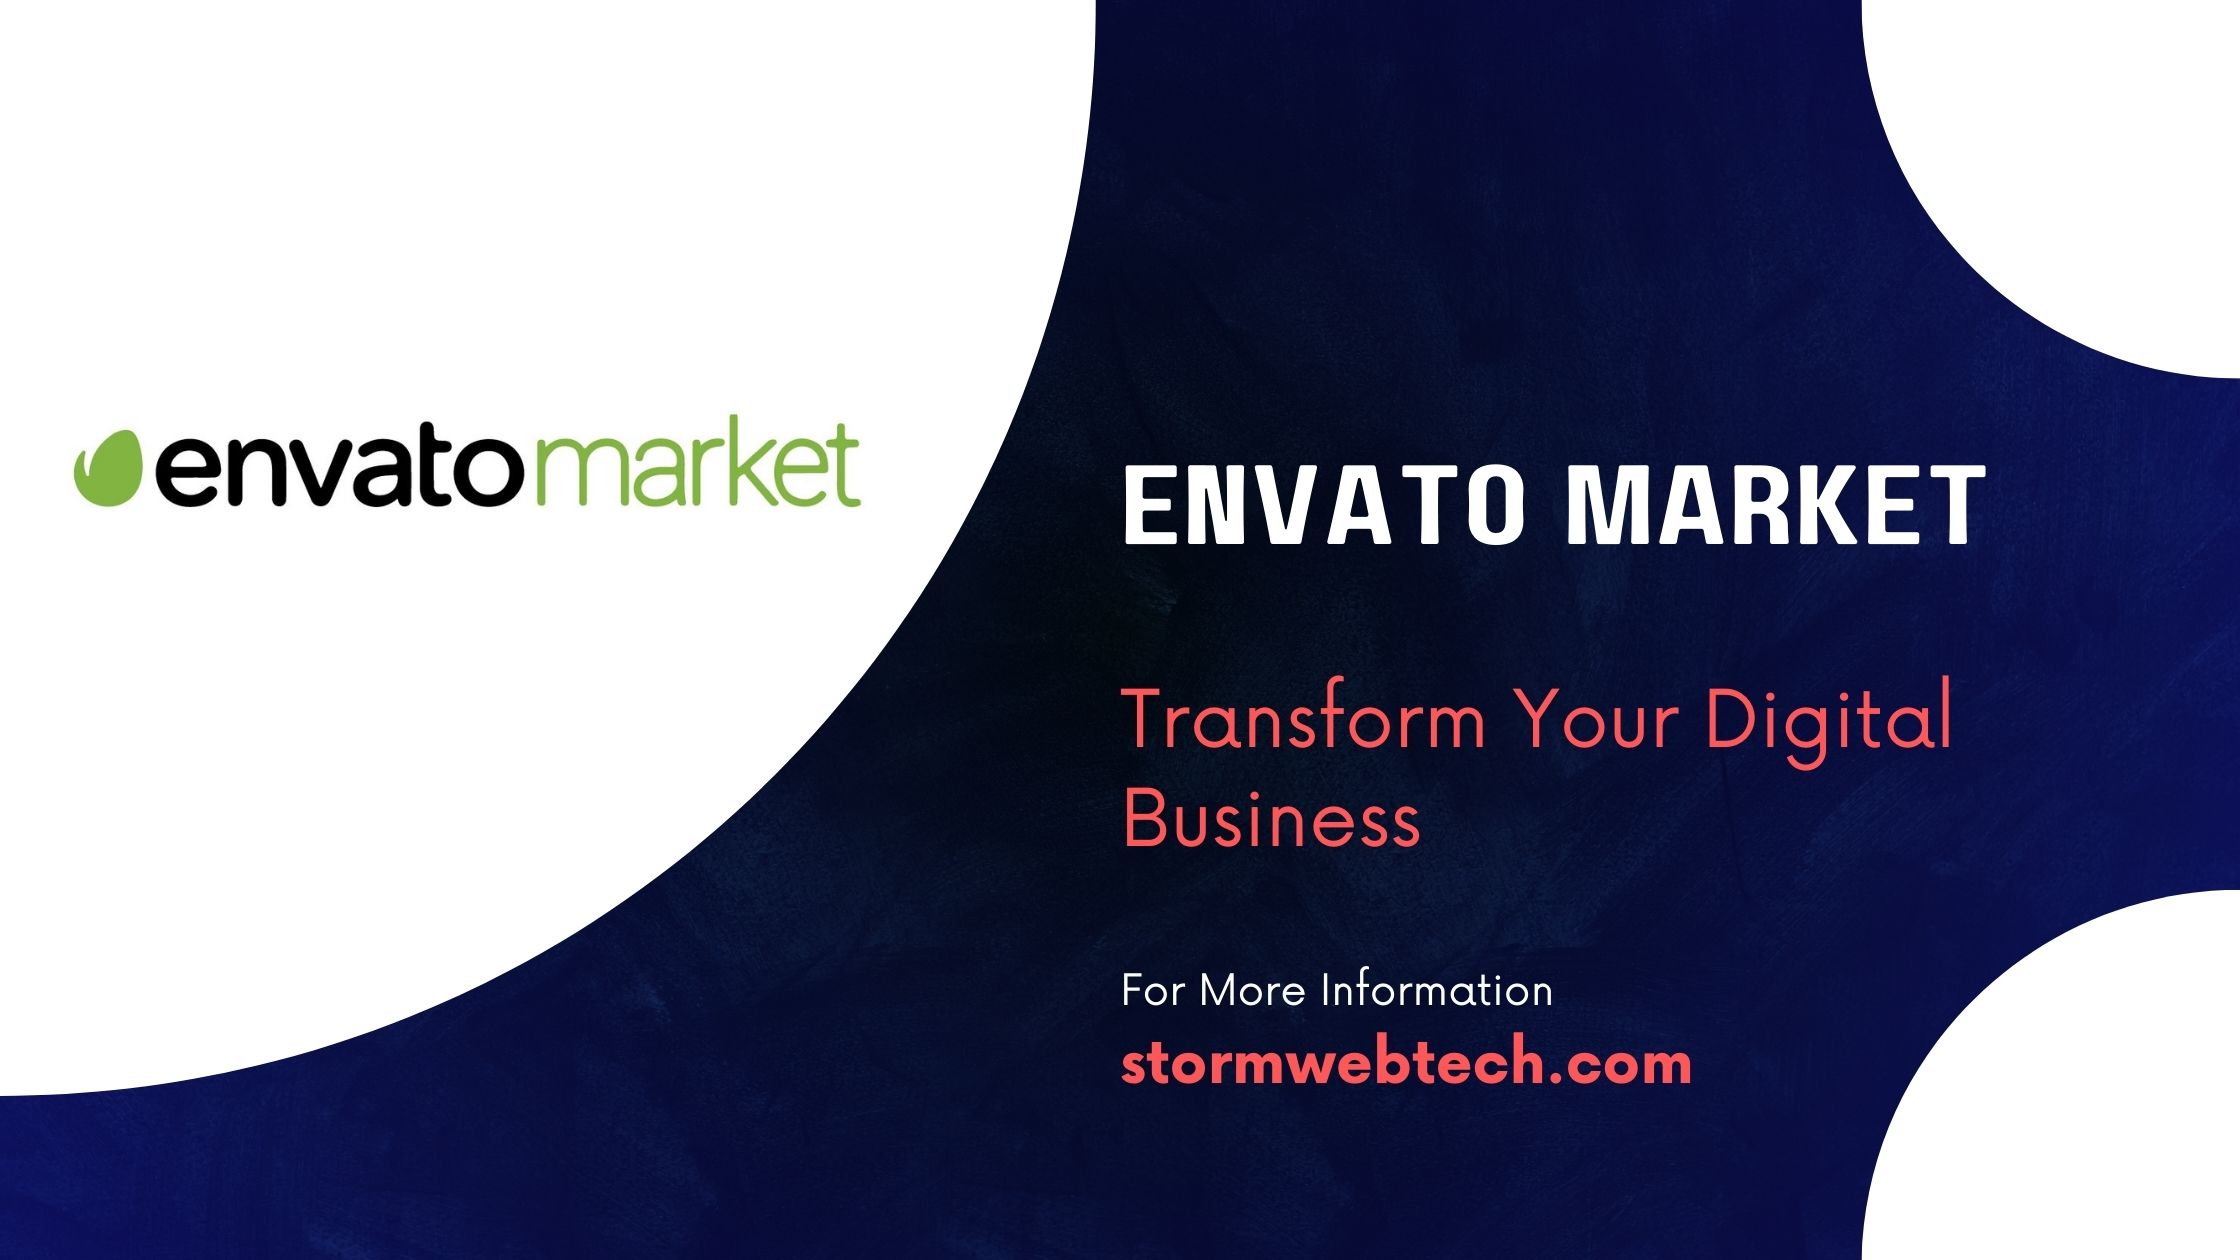 With a vast array of themes, templates, graphics, and more, Envato Market is a one-stop shop for all your digital needs